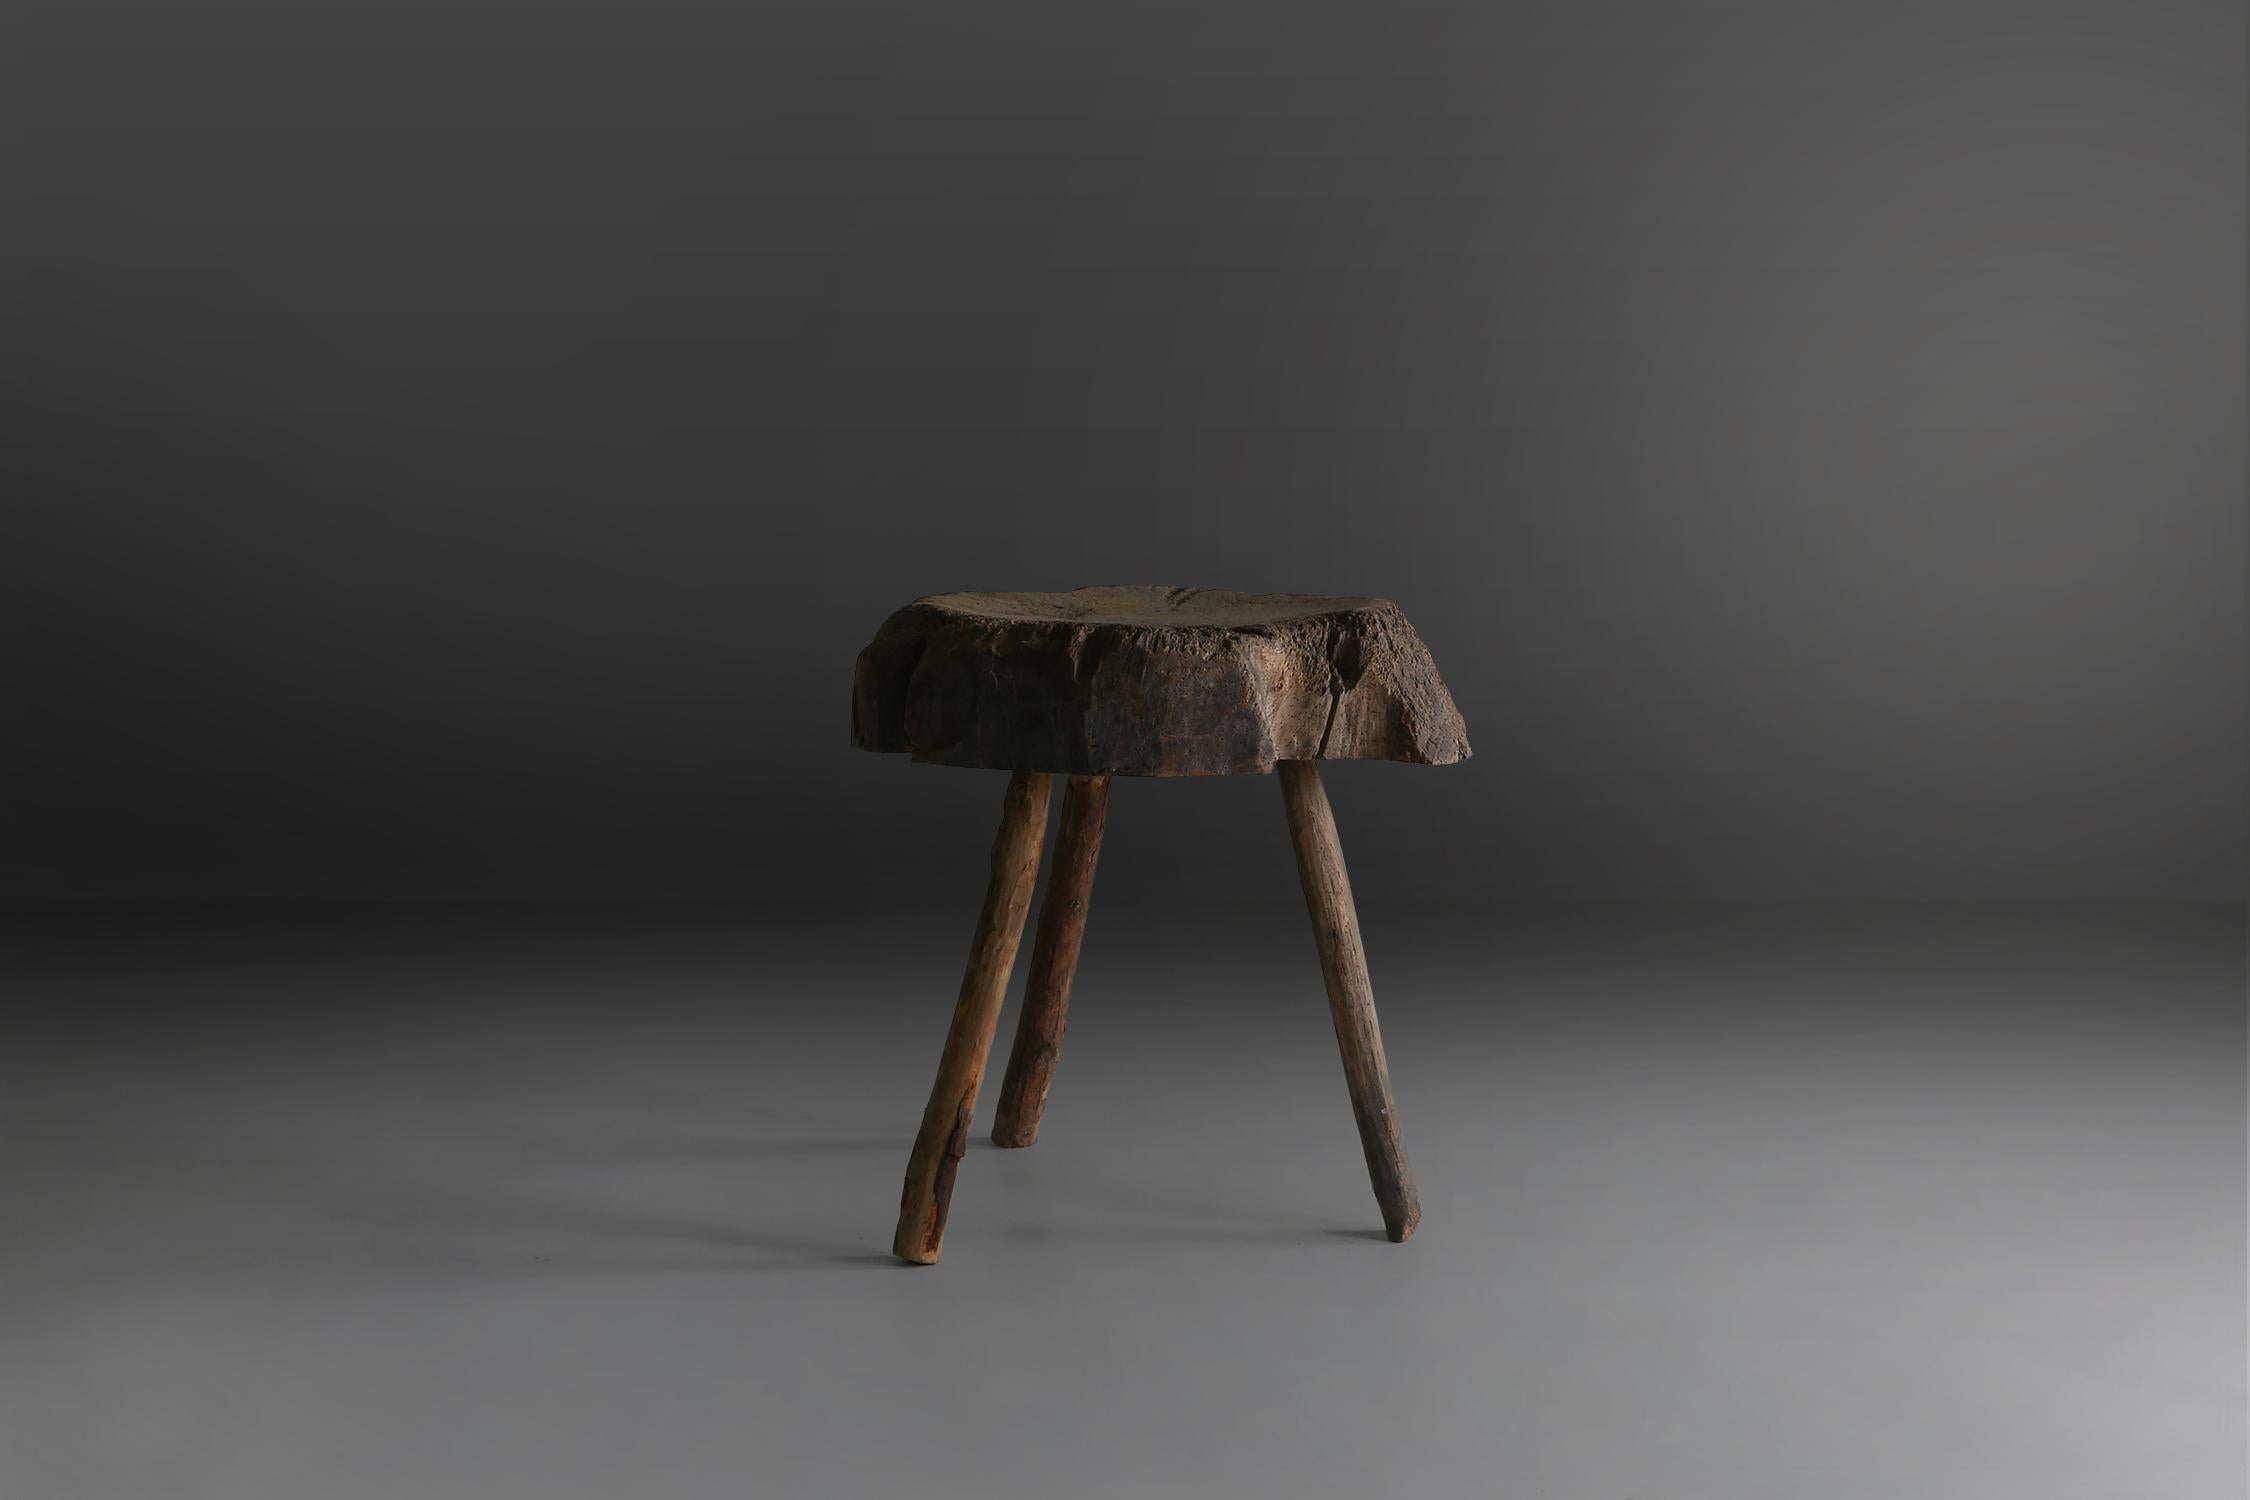 Rustic French Provincial Chopping Block Table, circa 1850